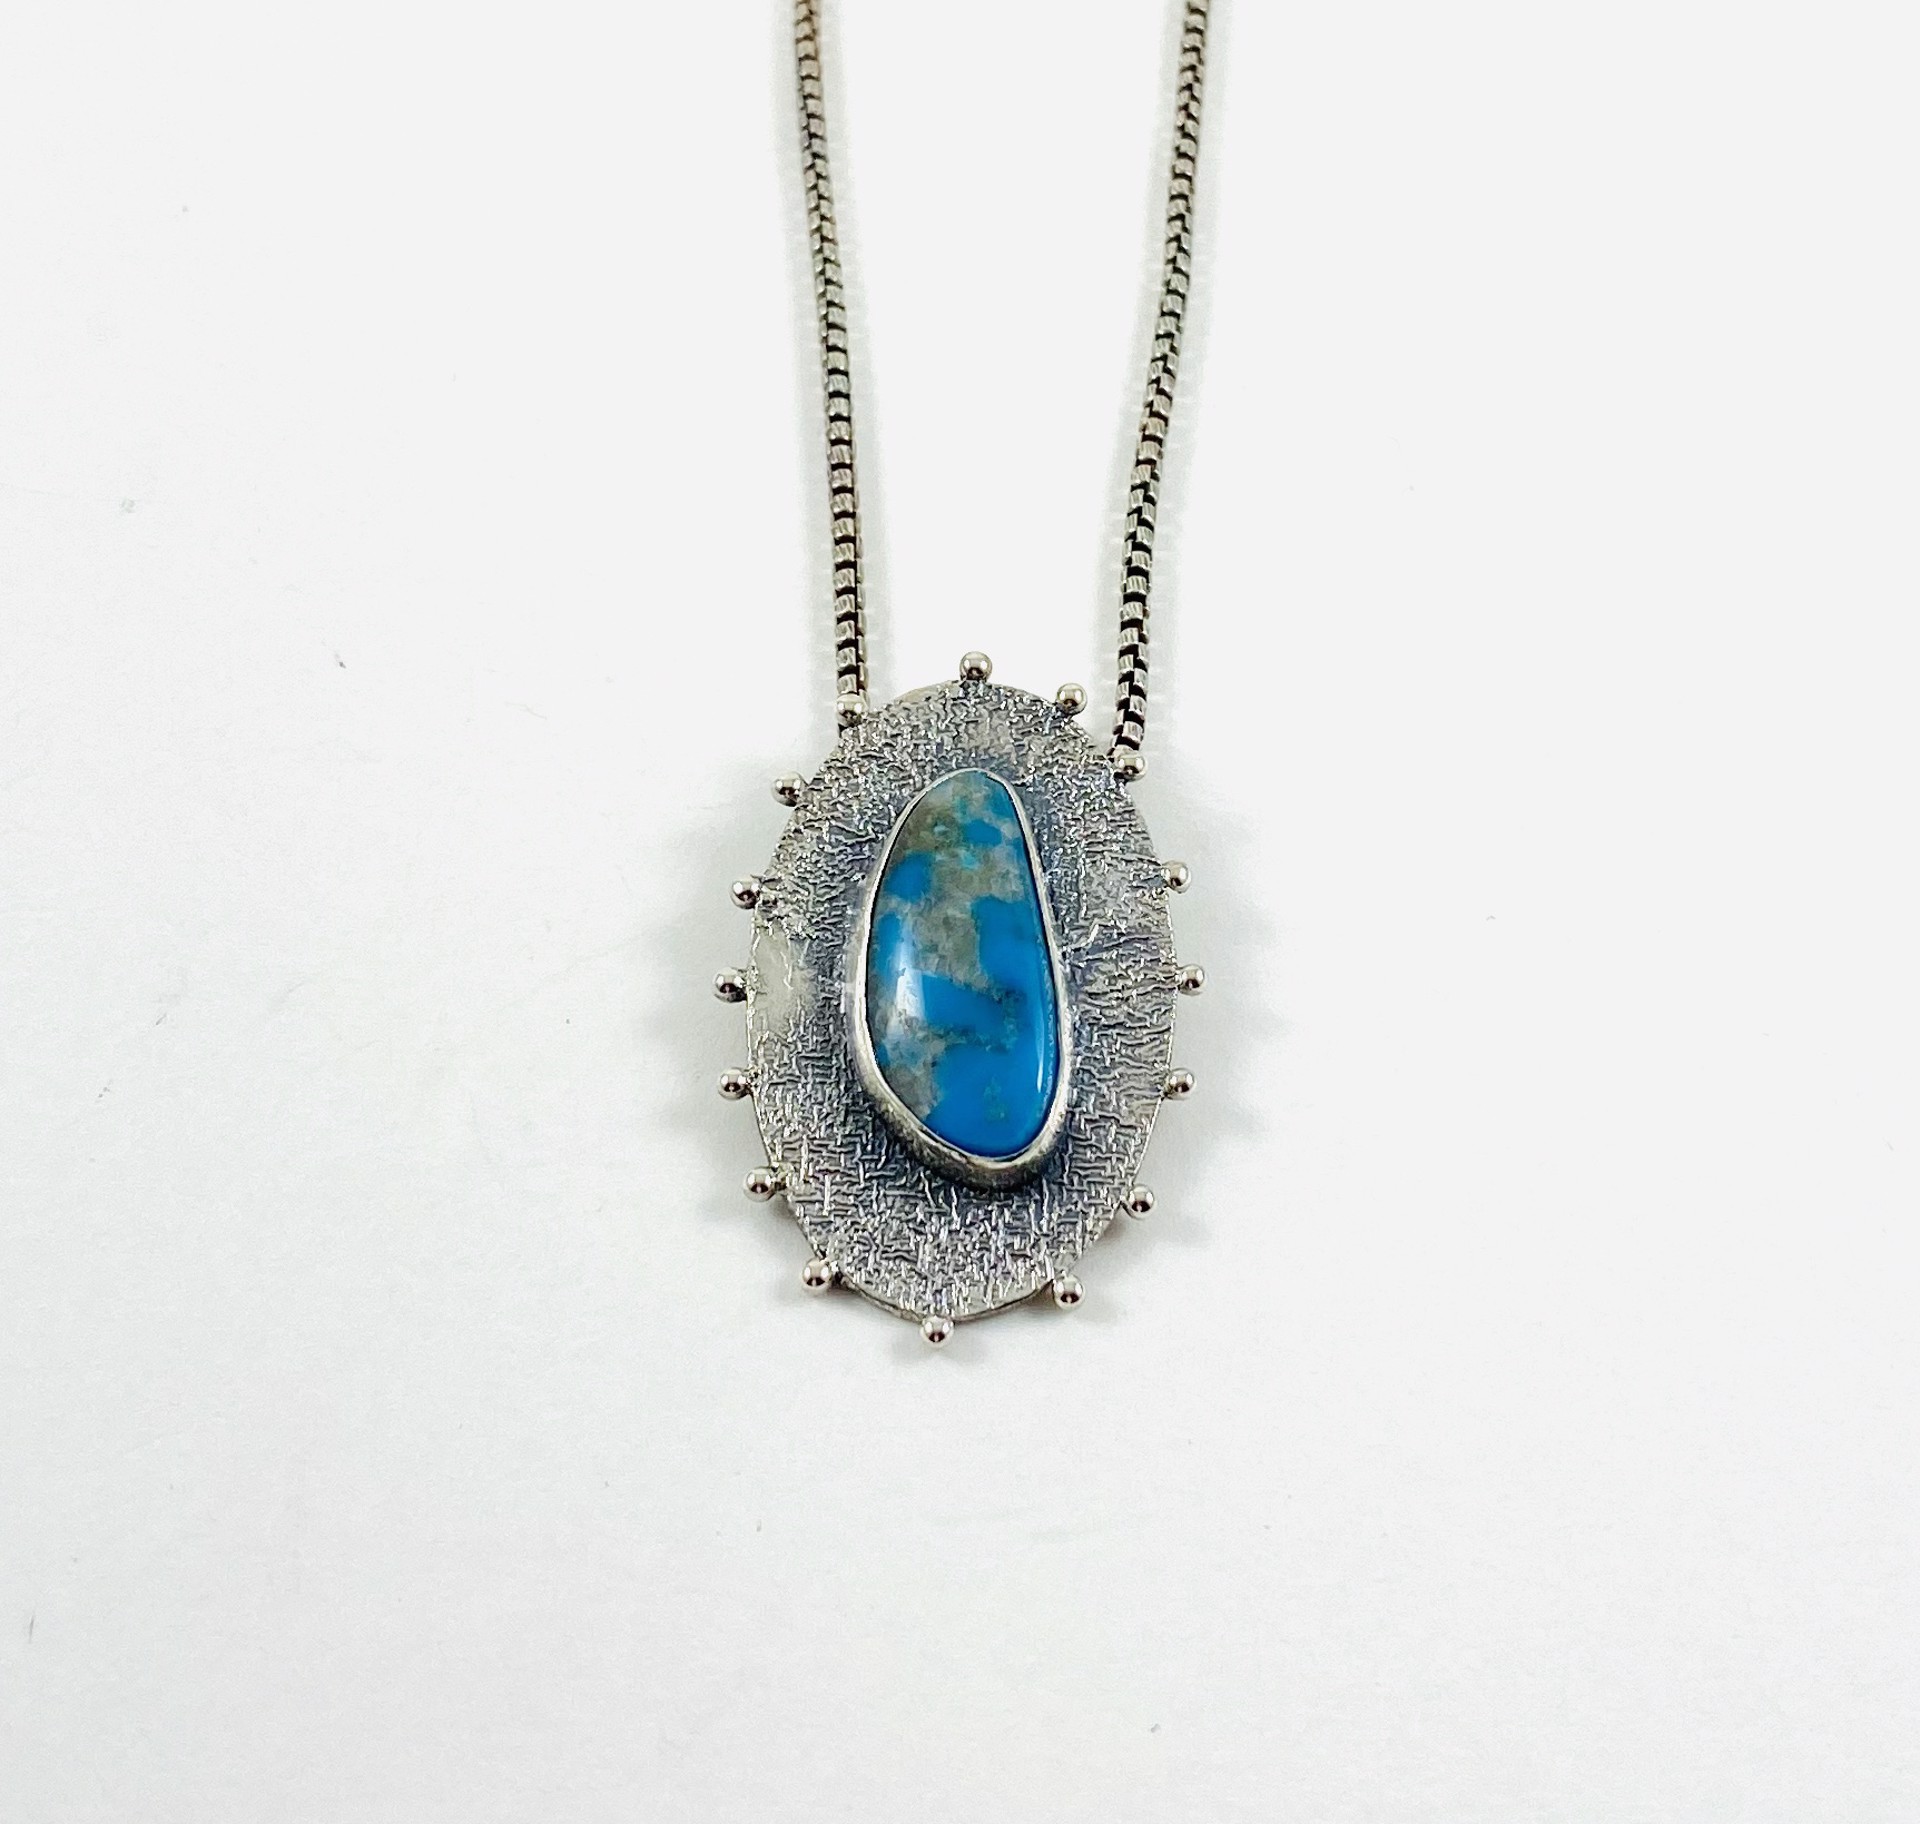 Morenci Turquoise Reticulated Silver Pendant, 18"silver Chain Necklace AB21-32 by Anne Bivens